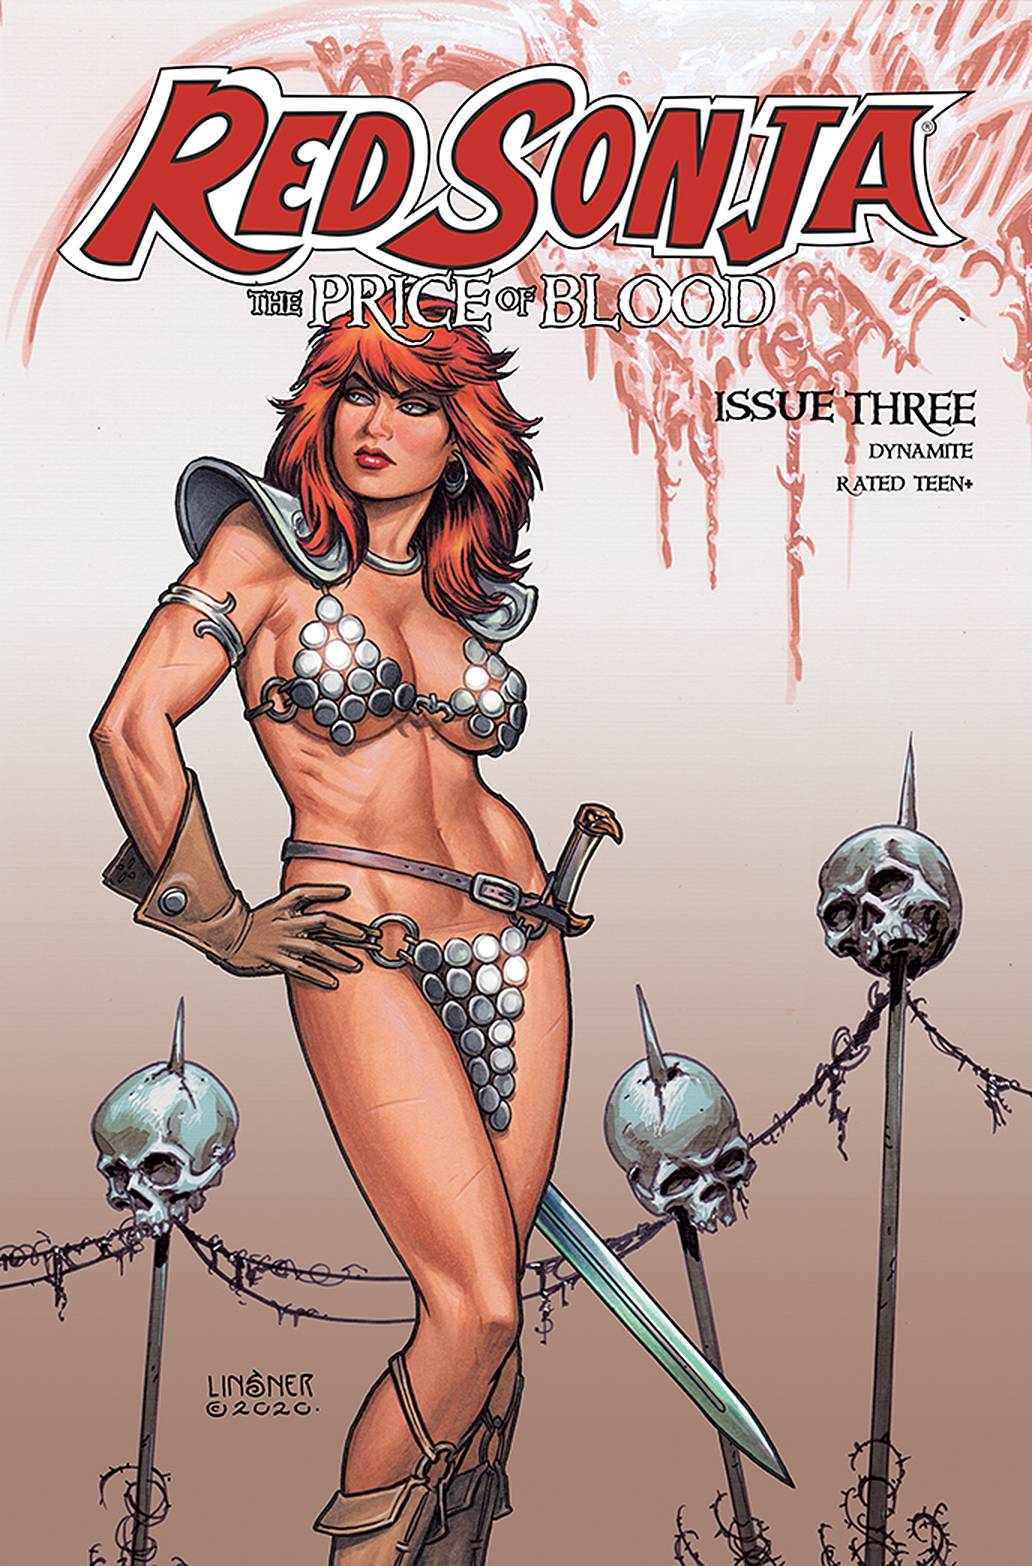 RED SONJA PRICE OF BLOOD